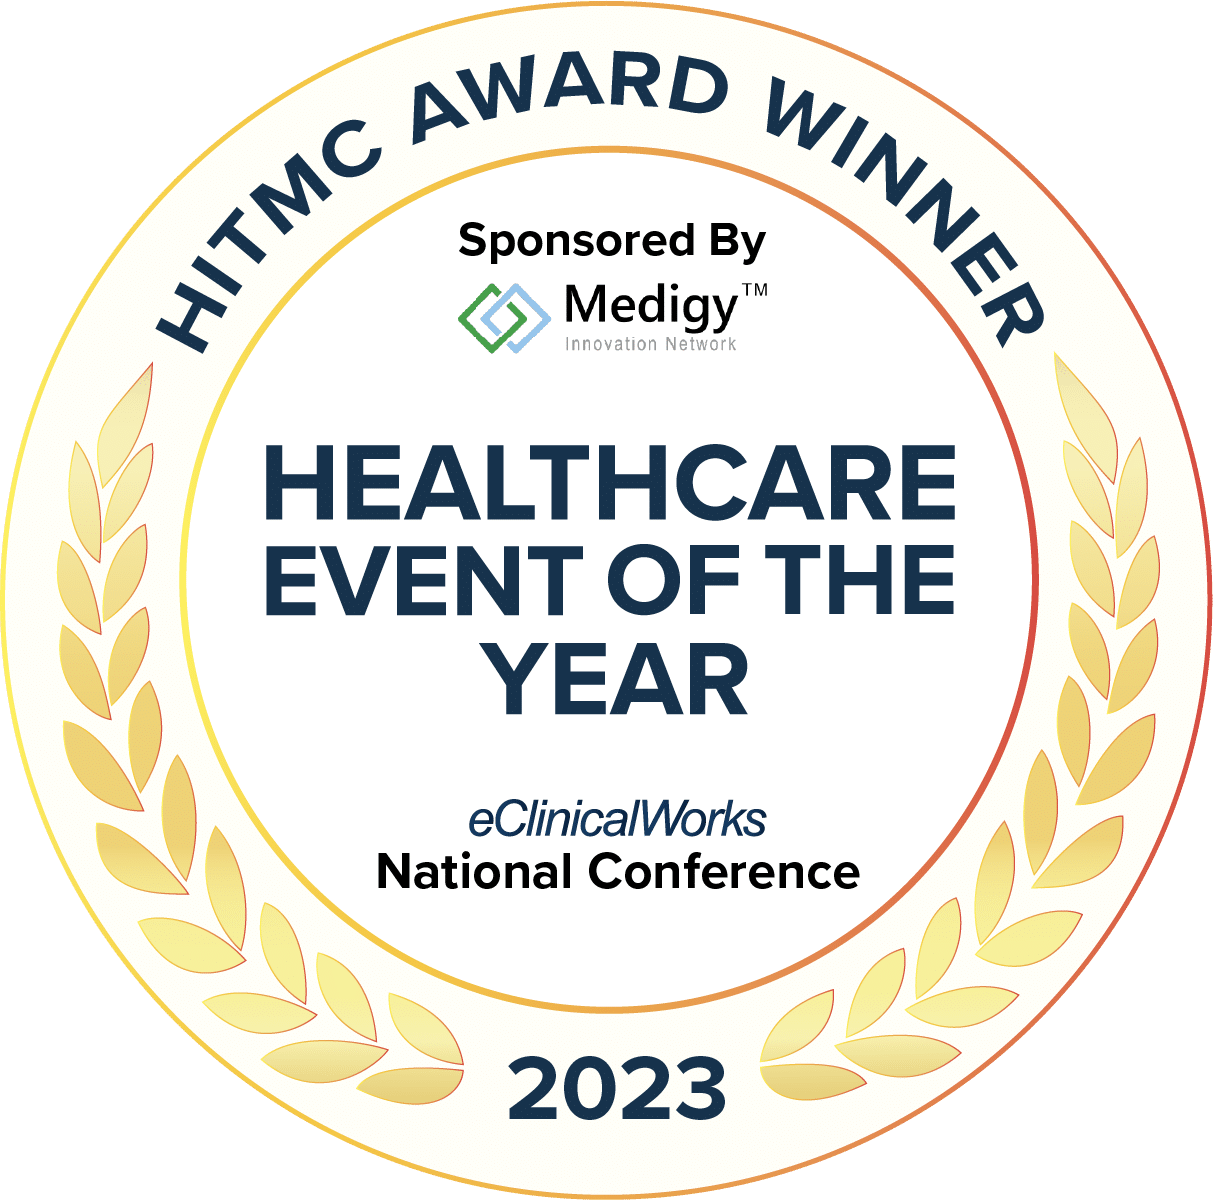 HITMC Award Winner 2023 Sponsored By Medigy Healthcare event of the year eClinicalWorks National Conference